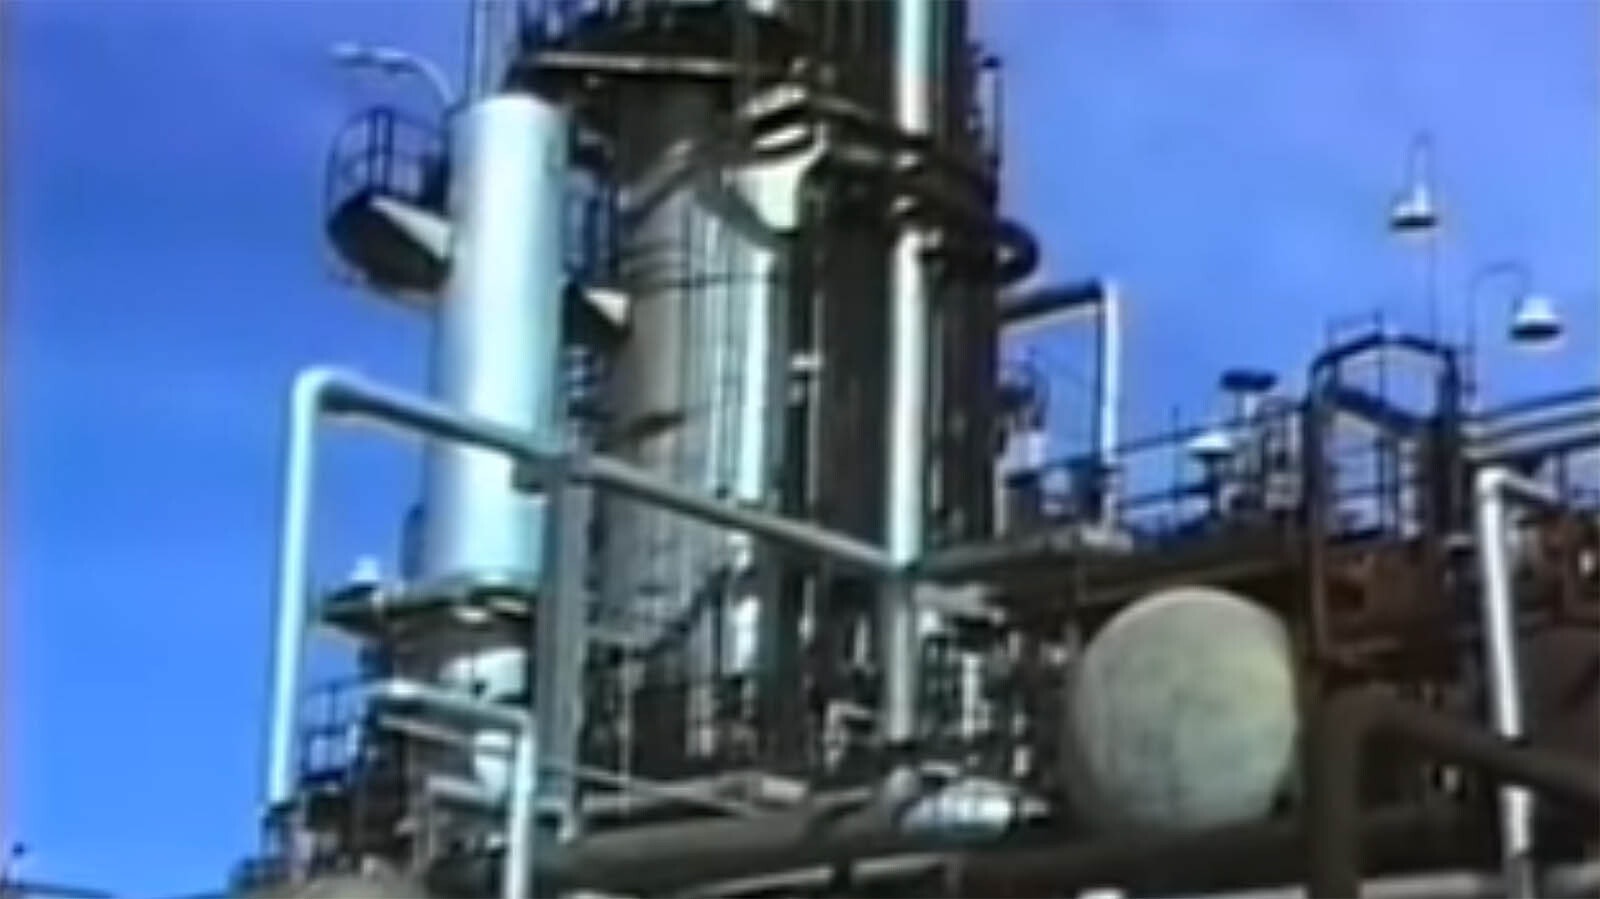 Images from a grainy 1991 YouTube video of the old Amoco refinery in Casper, Wyoming.